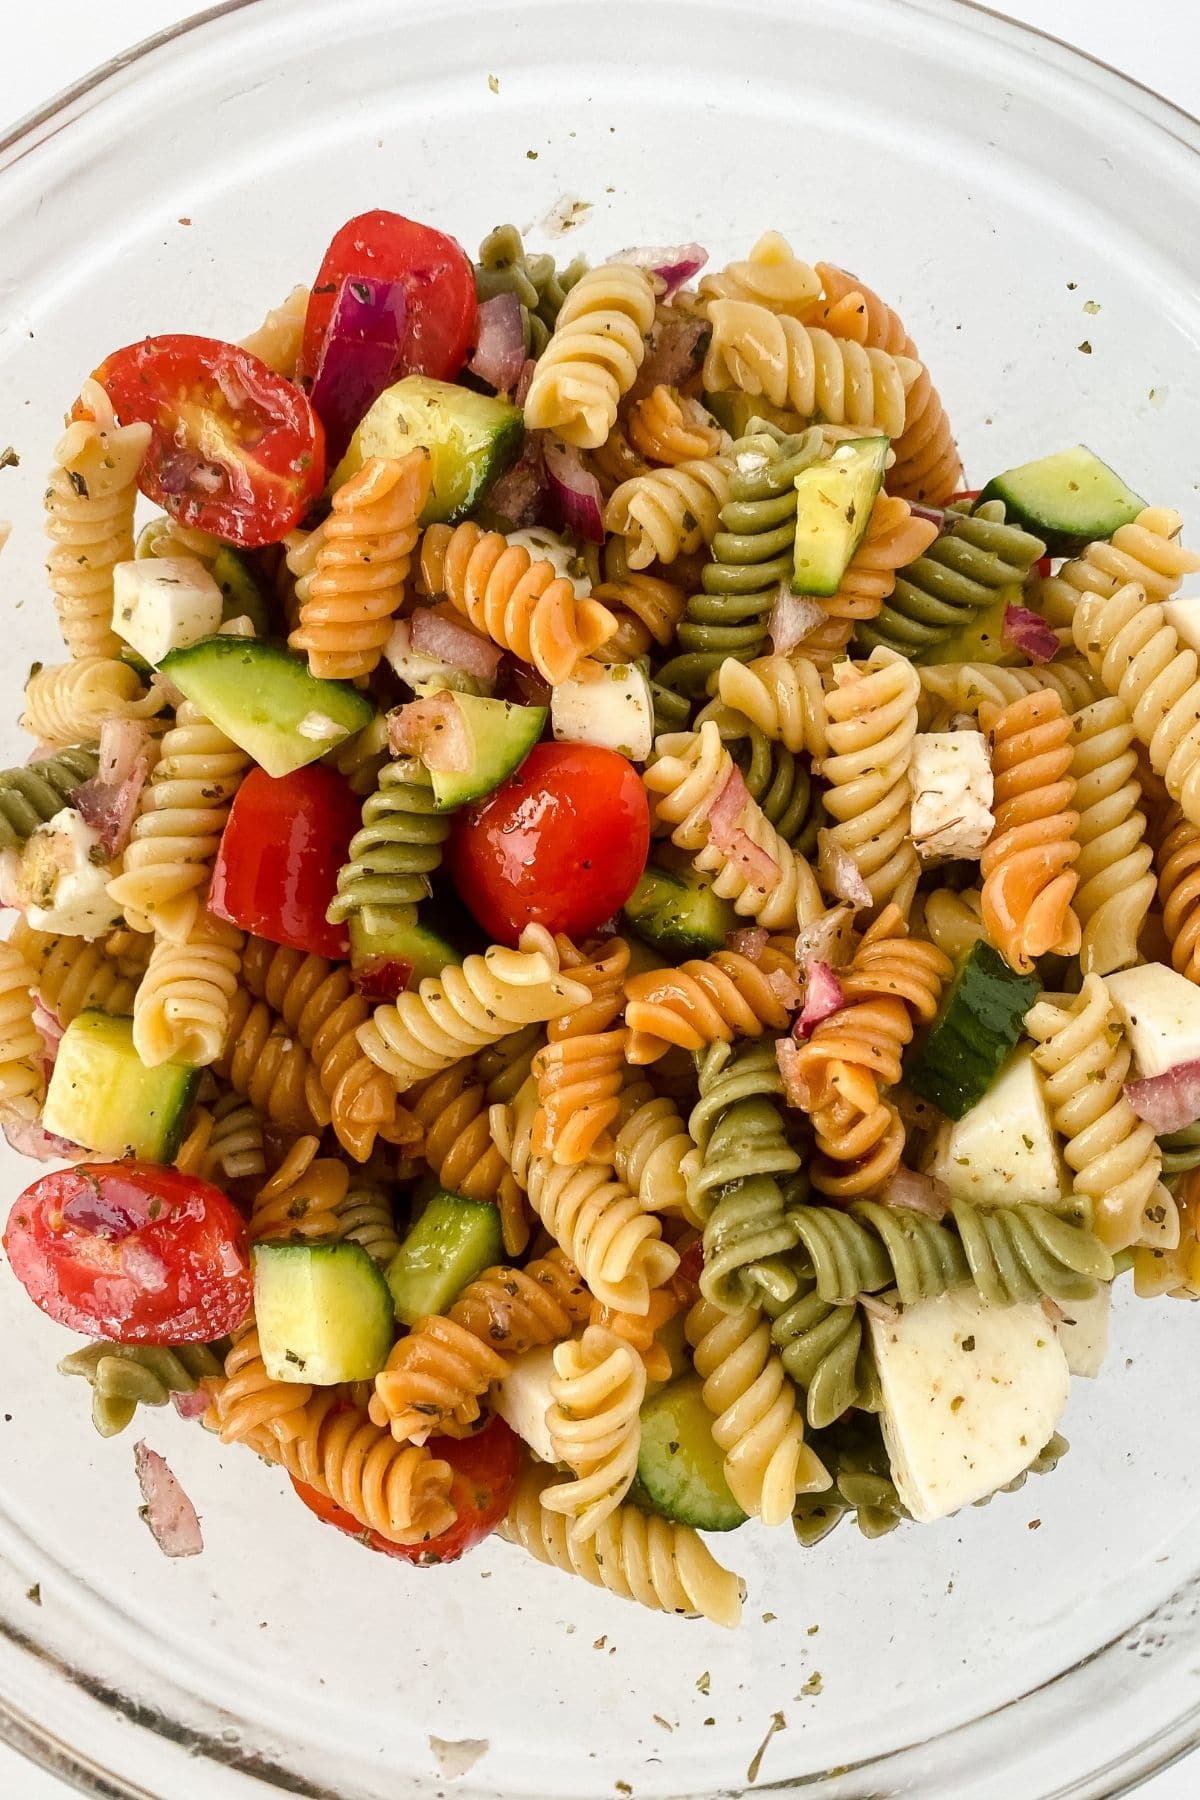 Large glass bowl of rotini pasta salad with cherry tomatoes and cucumbers